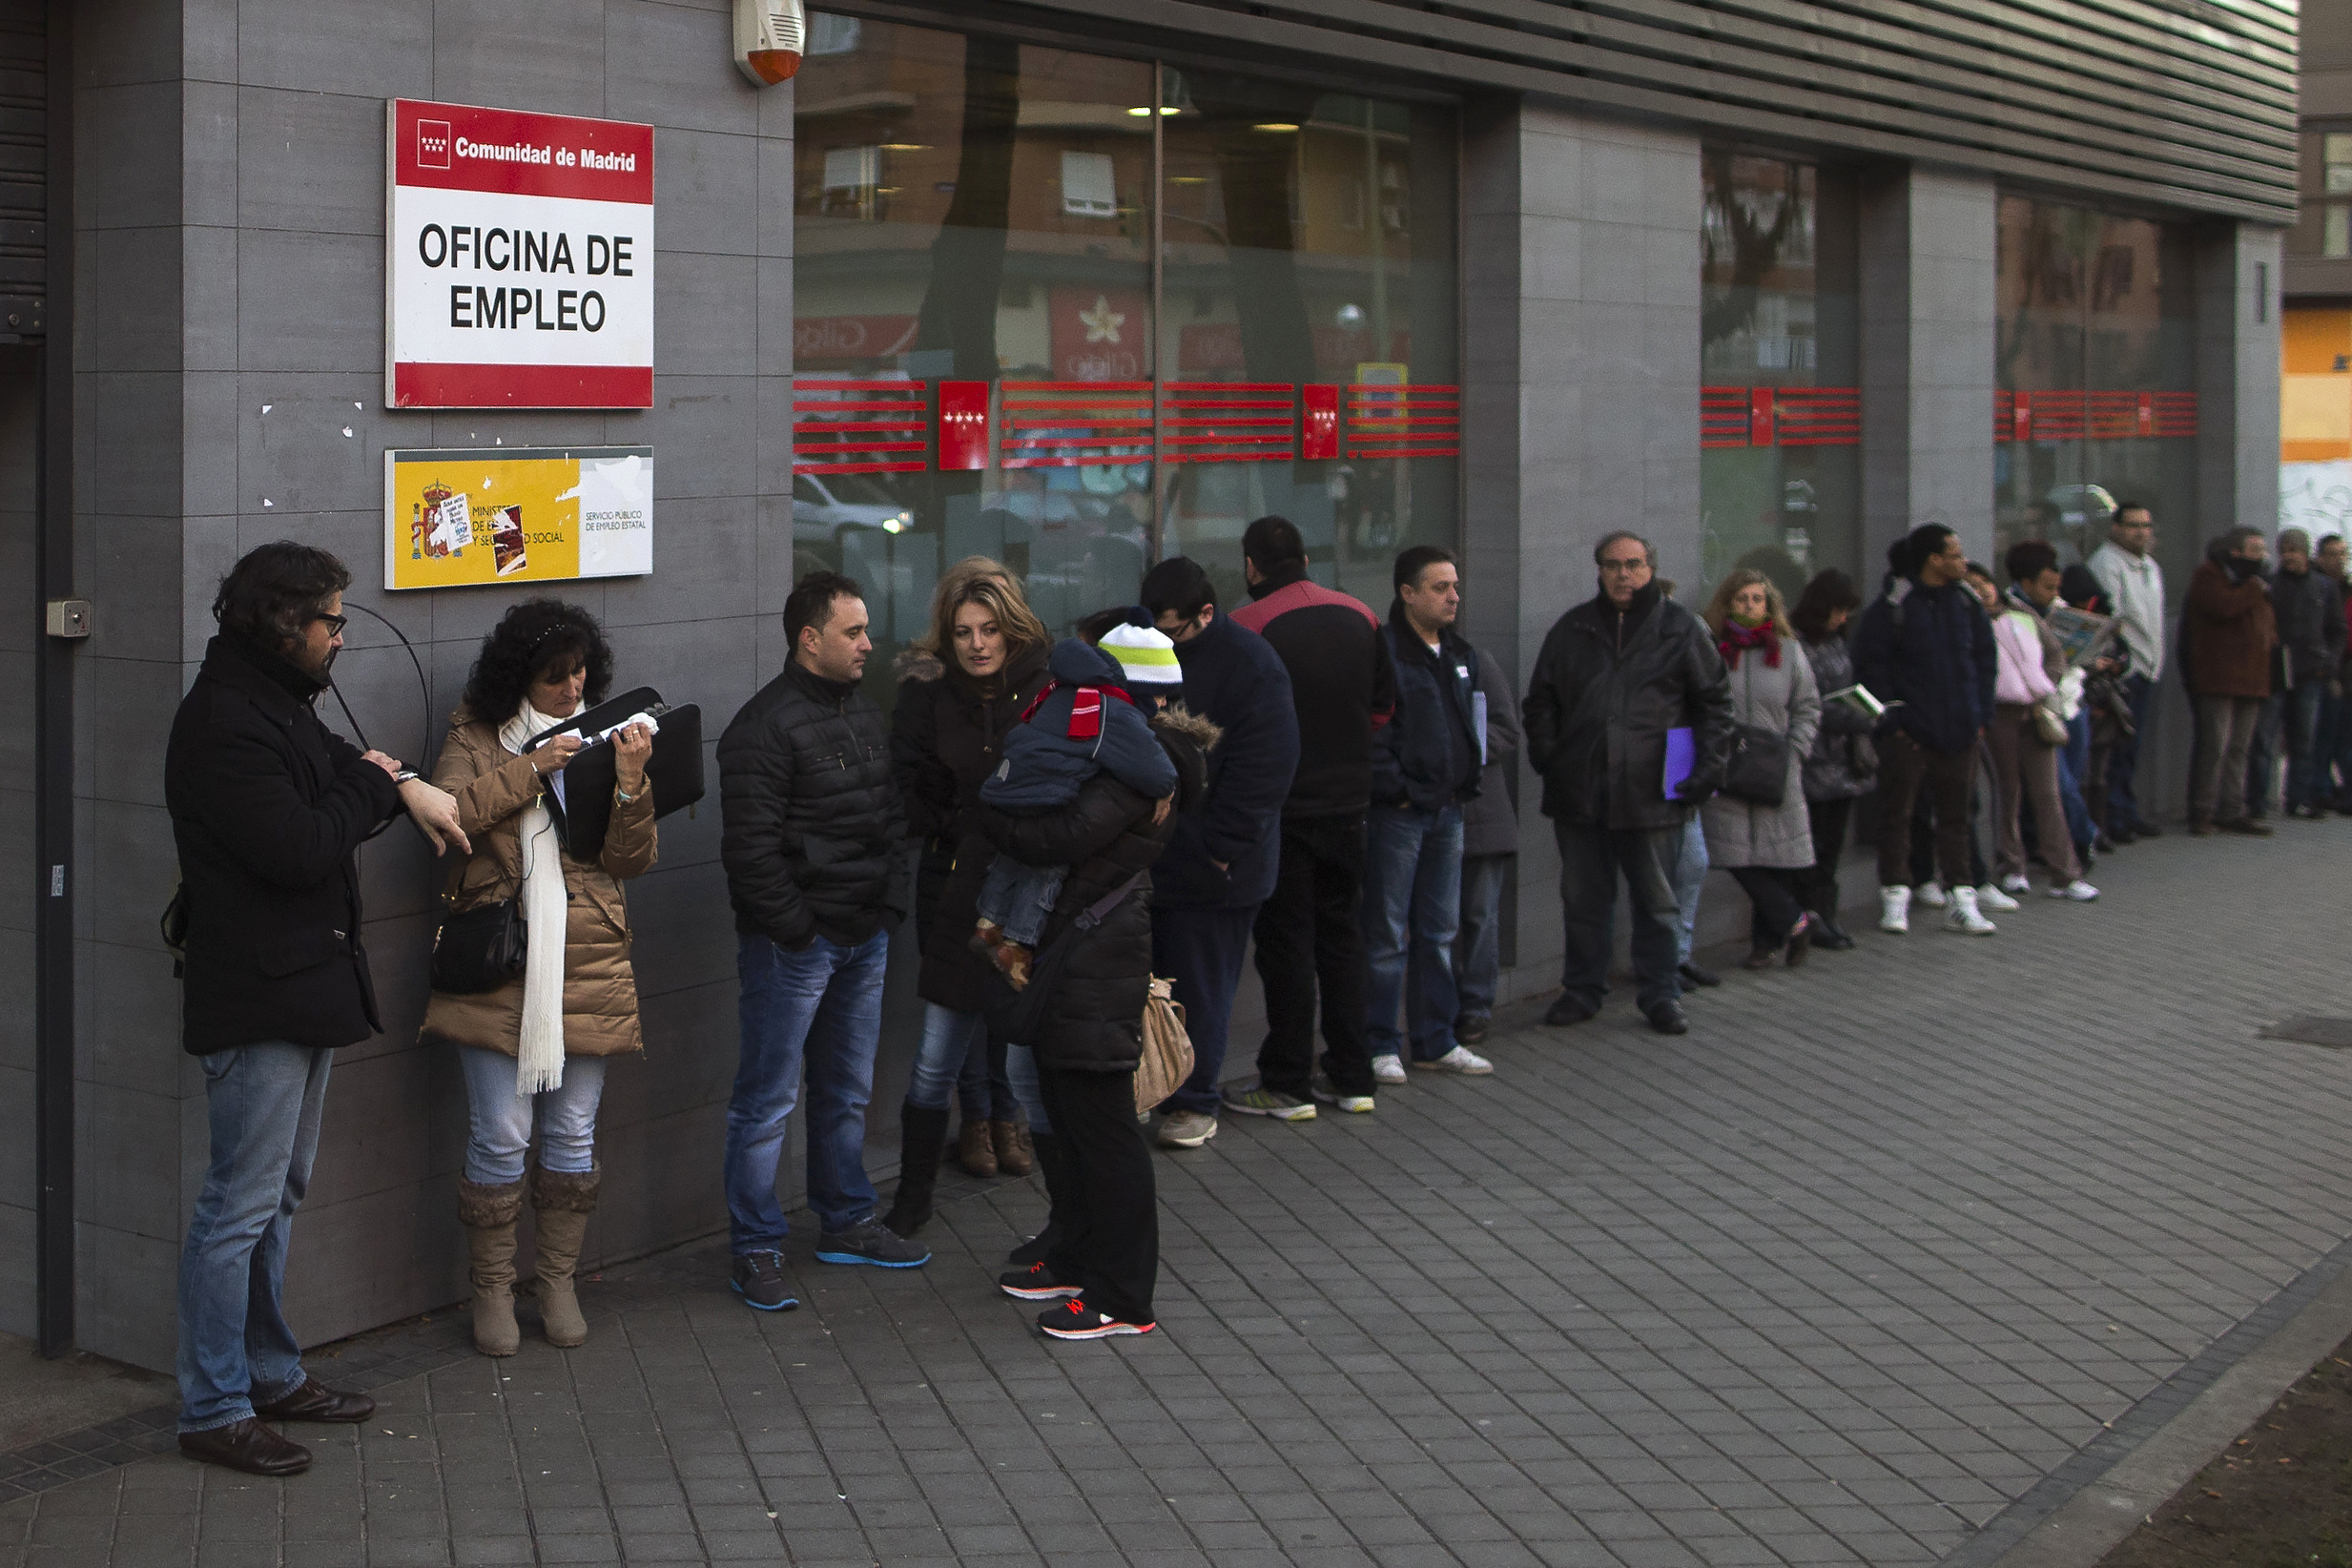 People wait in line to enter an unemployment registry office in Madrid, Spain, Thursday, Jan. 23, 2014.